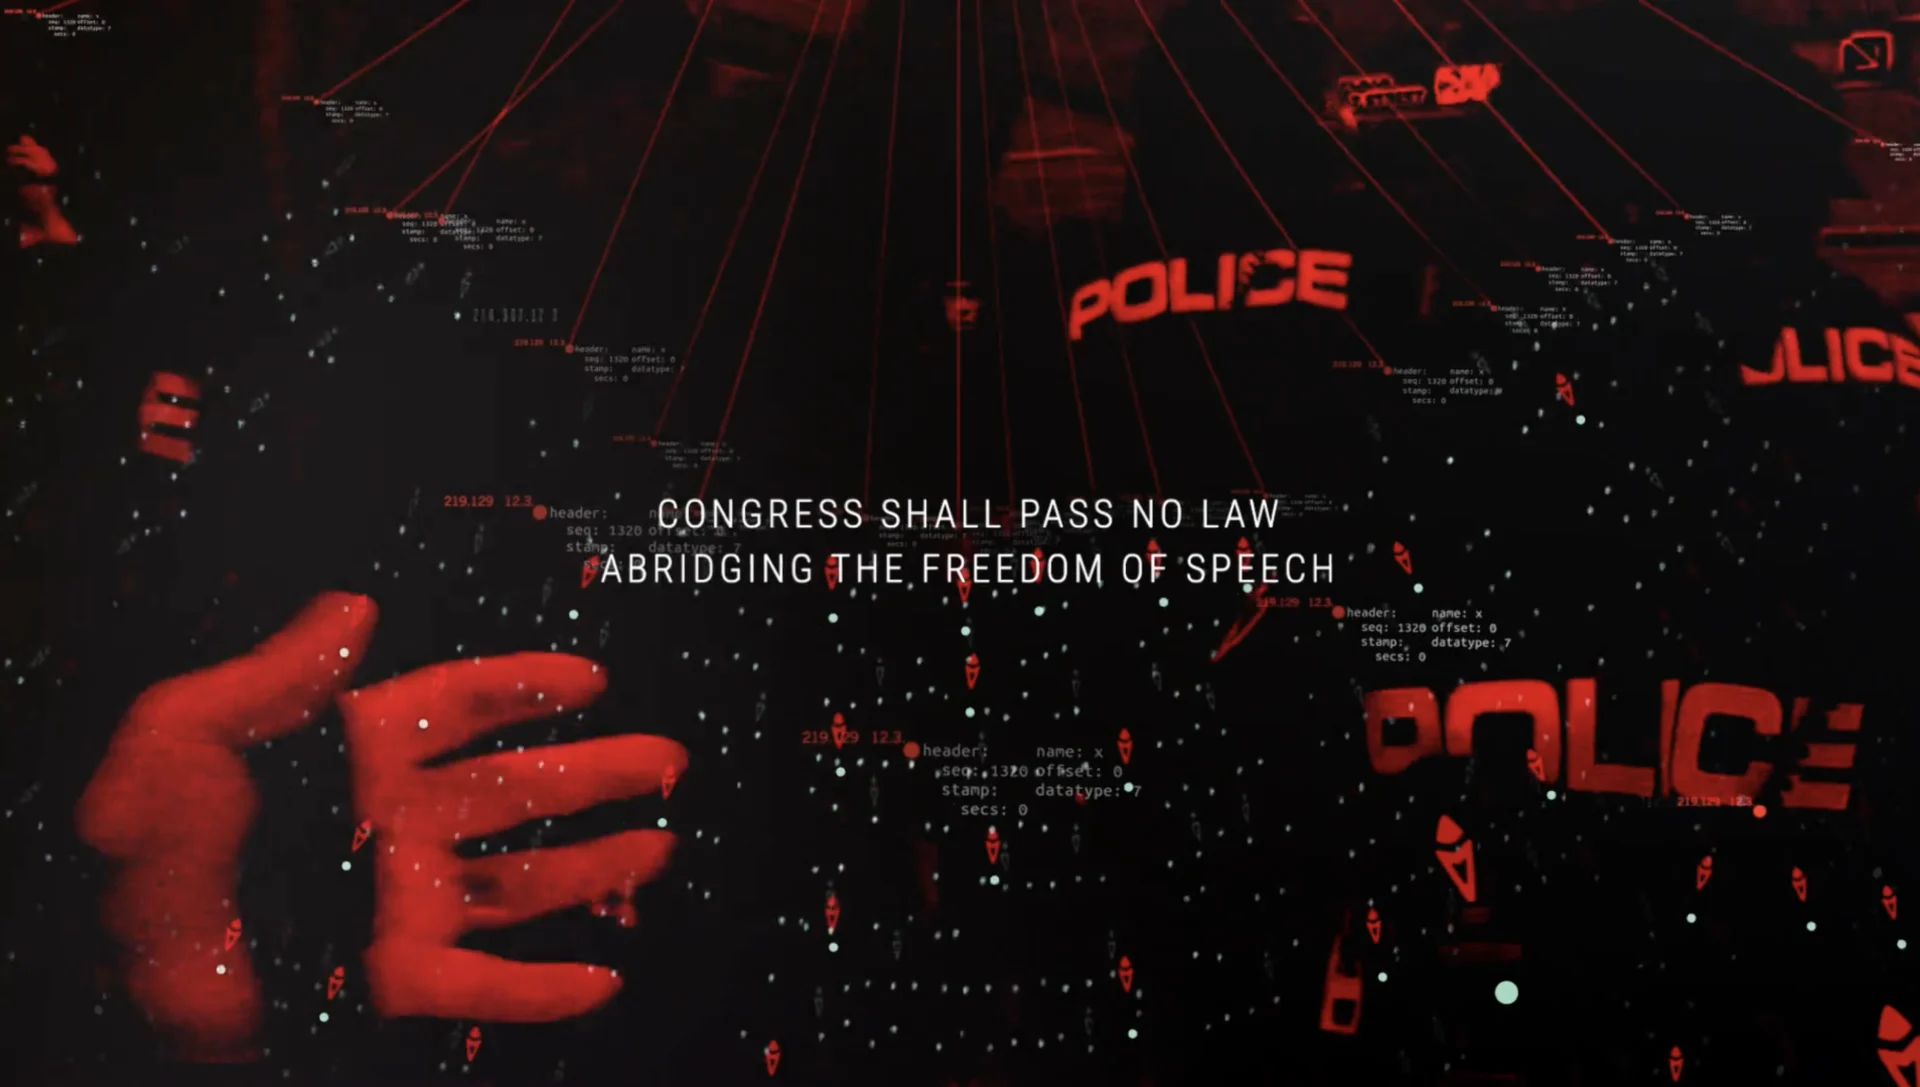 For Truth & Power's main title sequence, we used original and stock photography to build the sequence and layer it with impactful text and headlines, giving the open a frantic, paranoid feel.